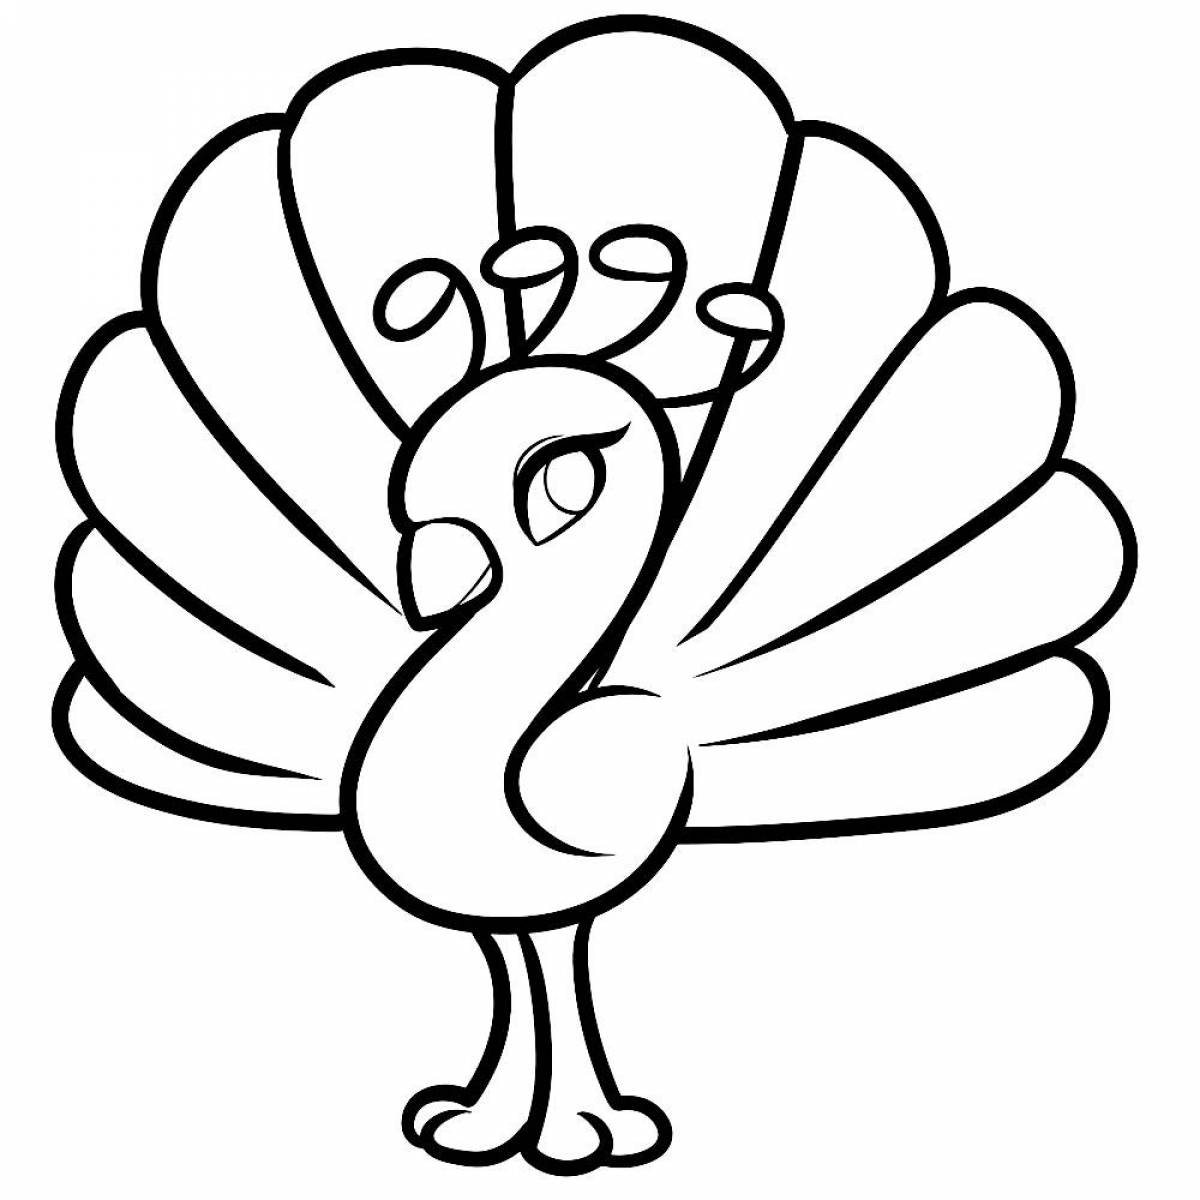 Glorious peacock coloring pages for kids